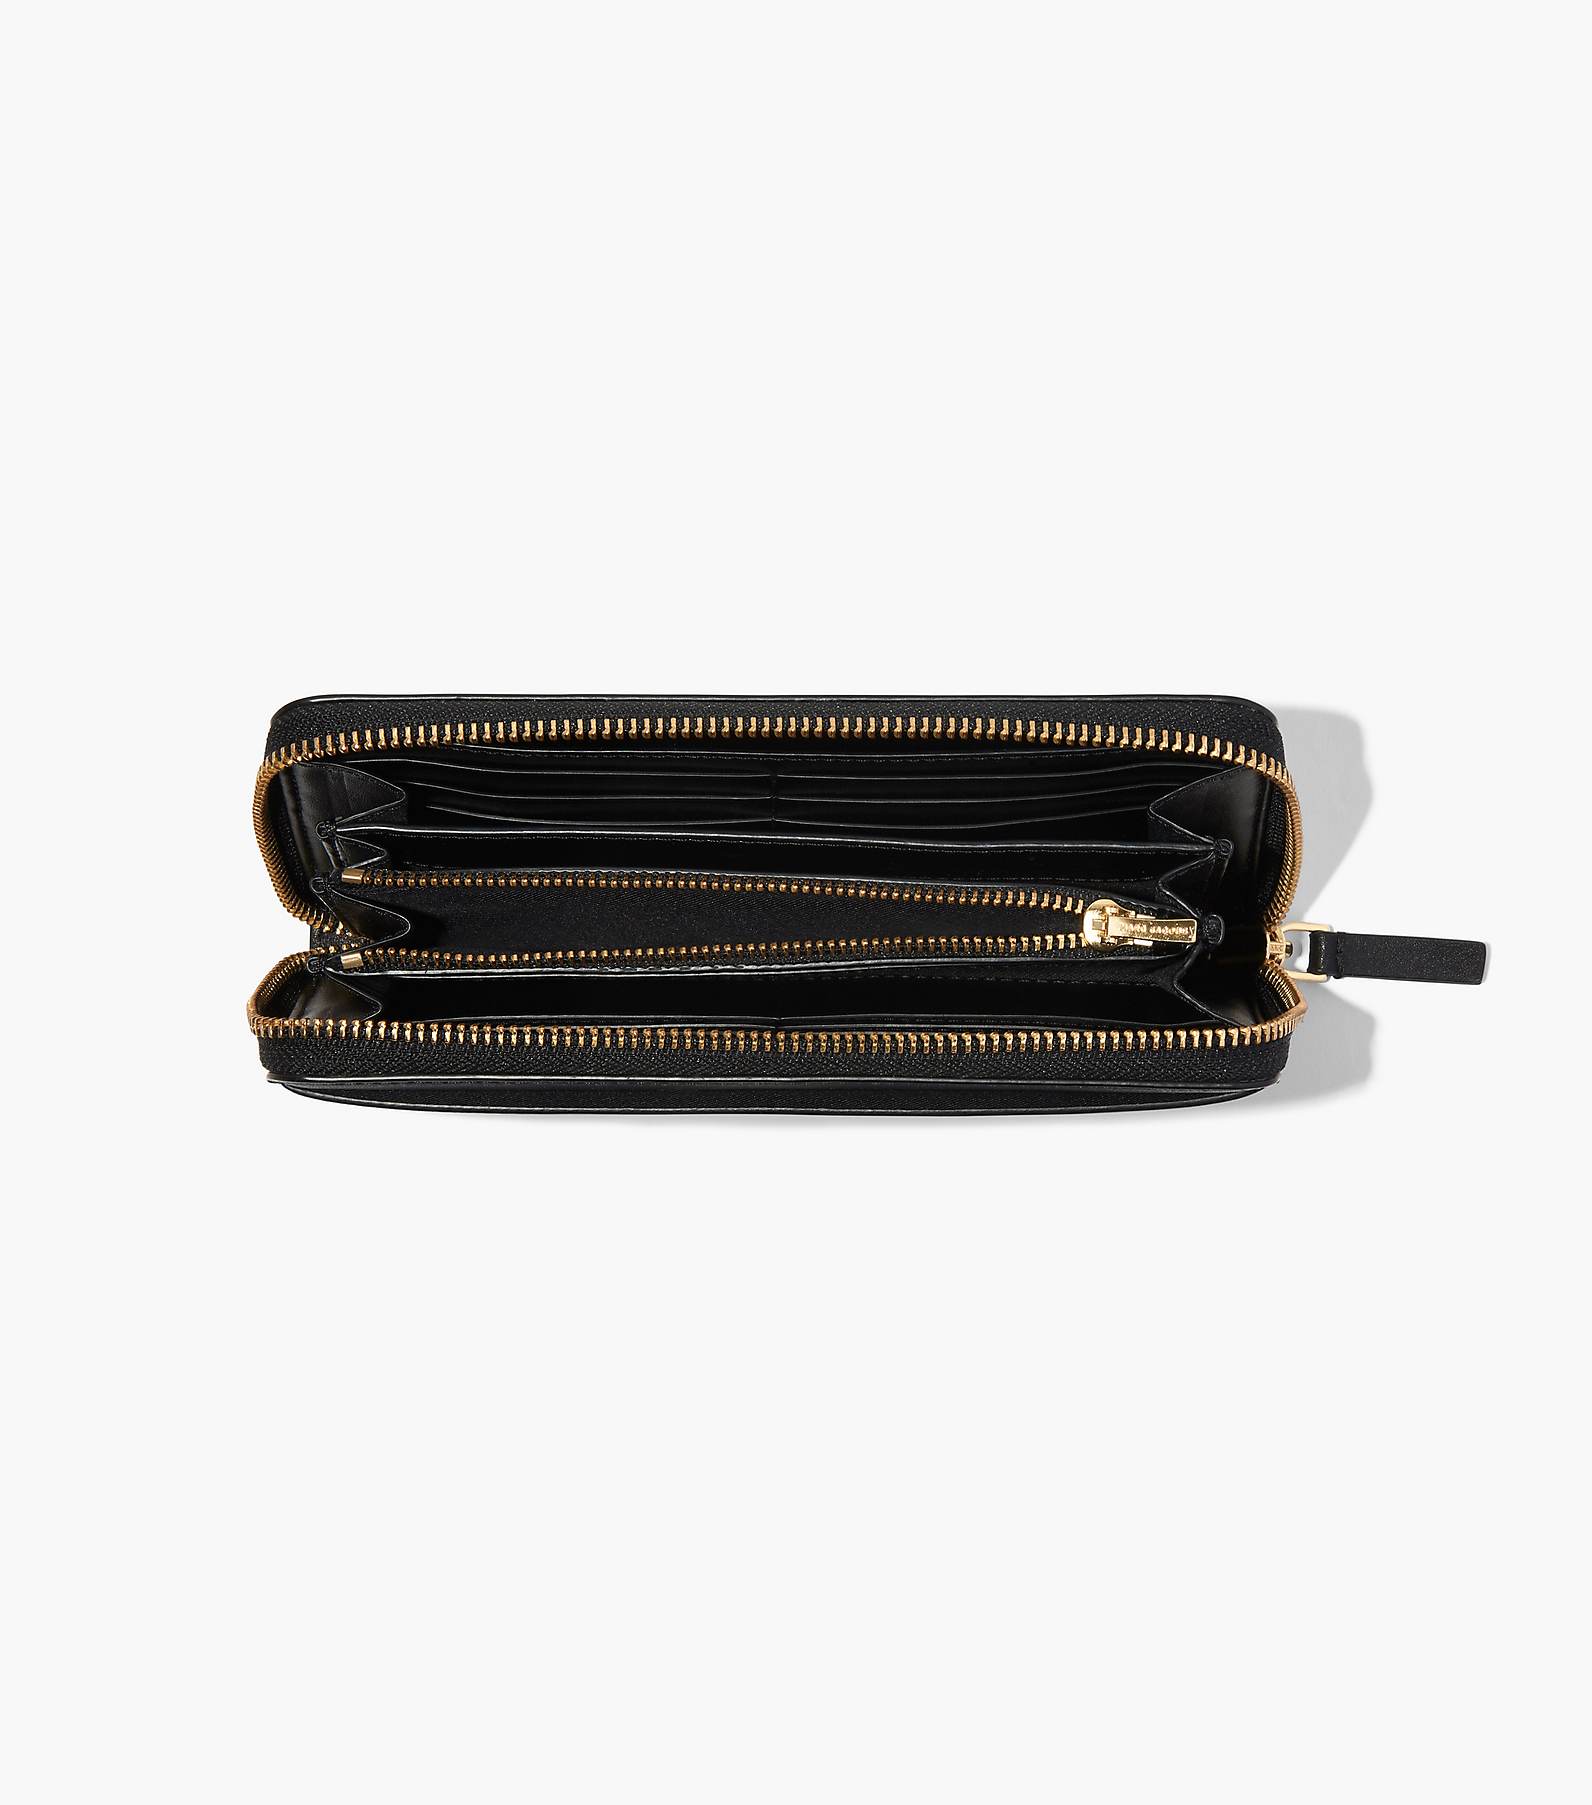 The J Marc Continental Wallet | Marc Jacobs | Official Site